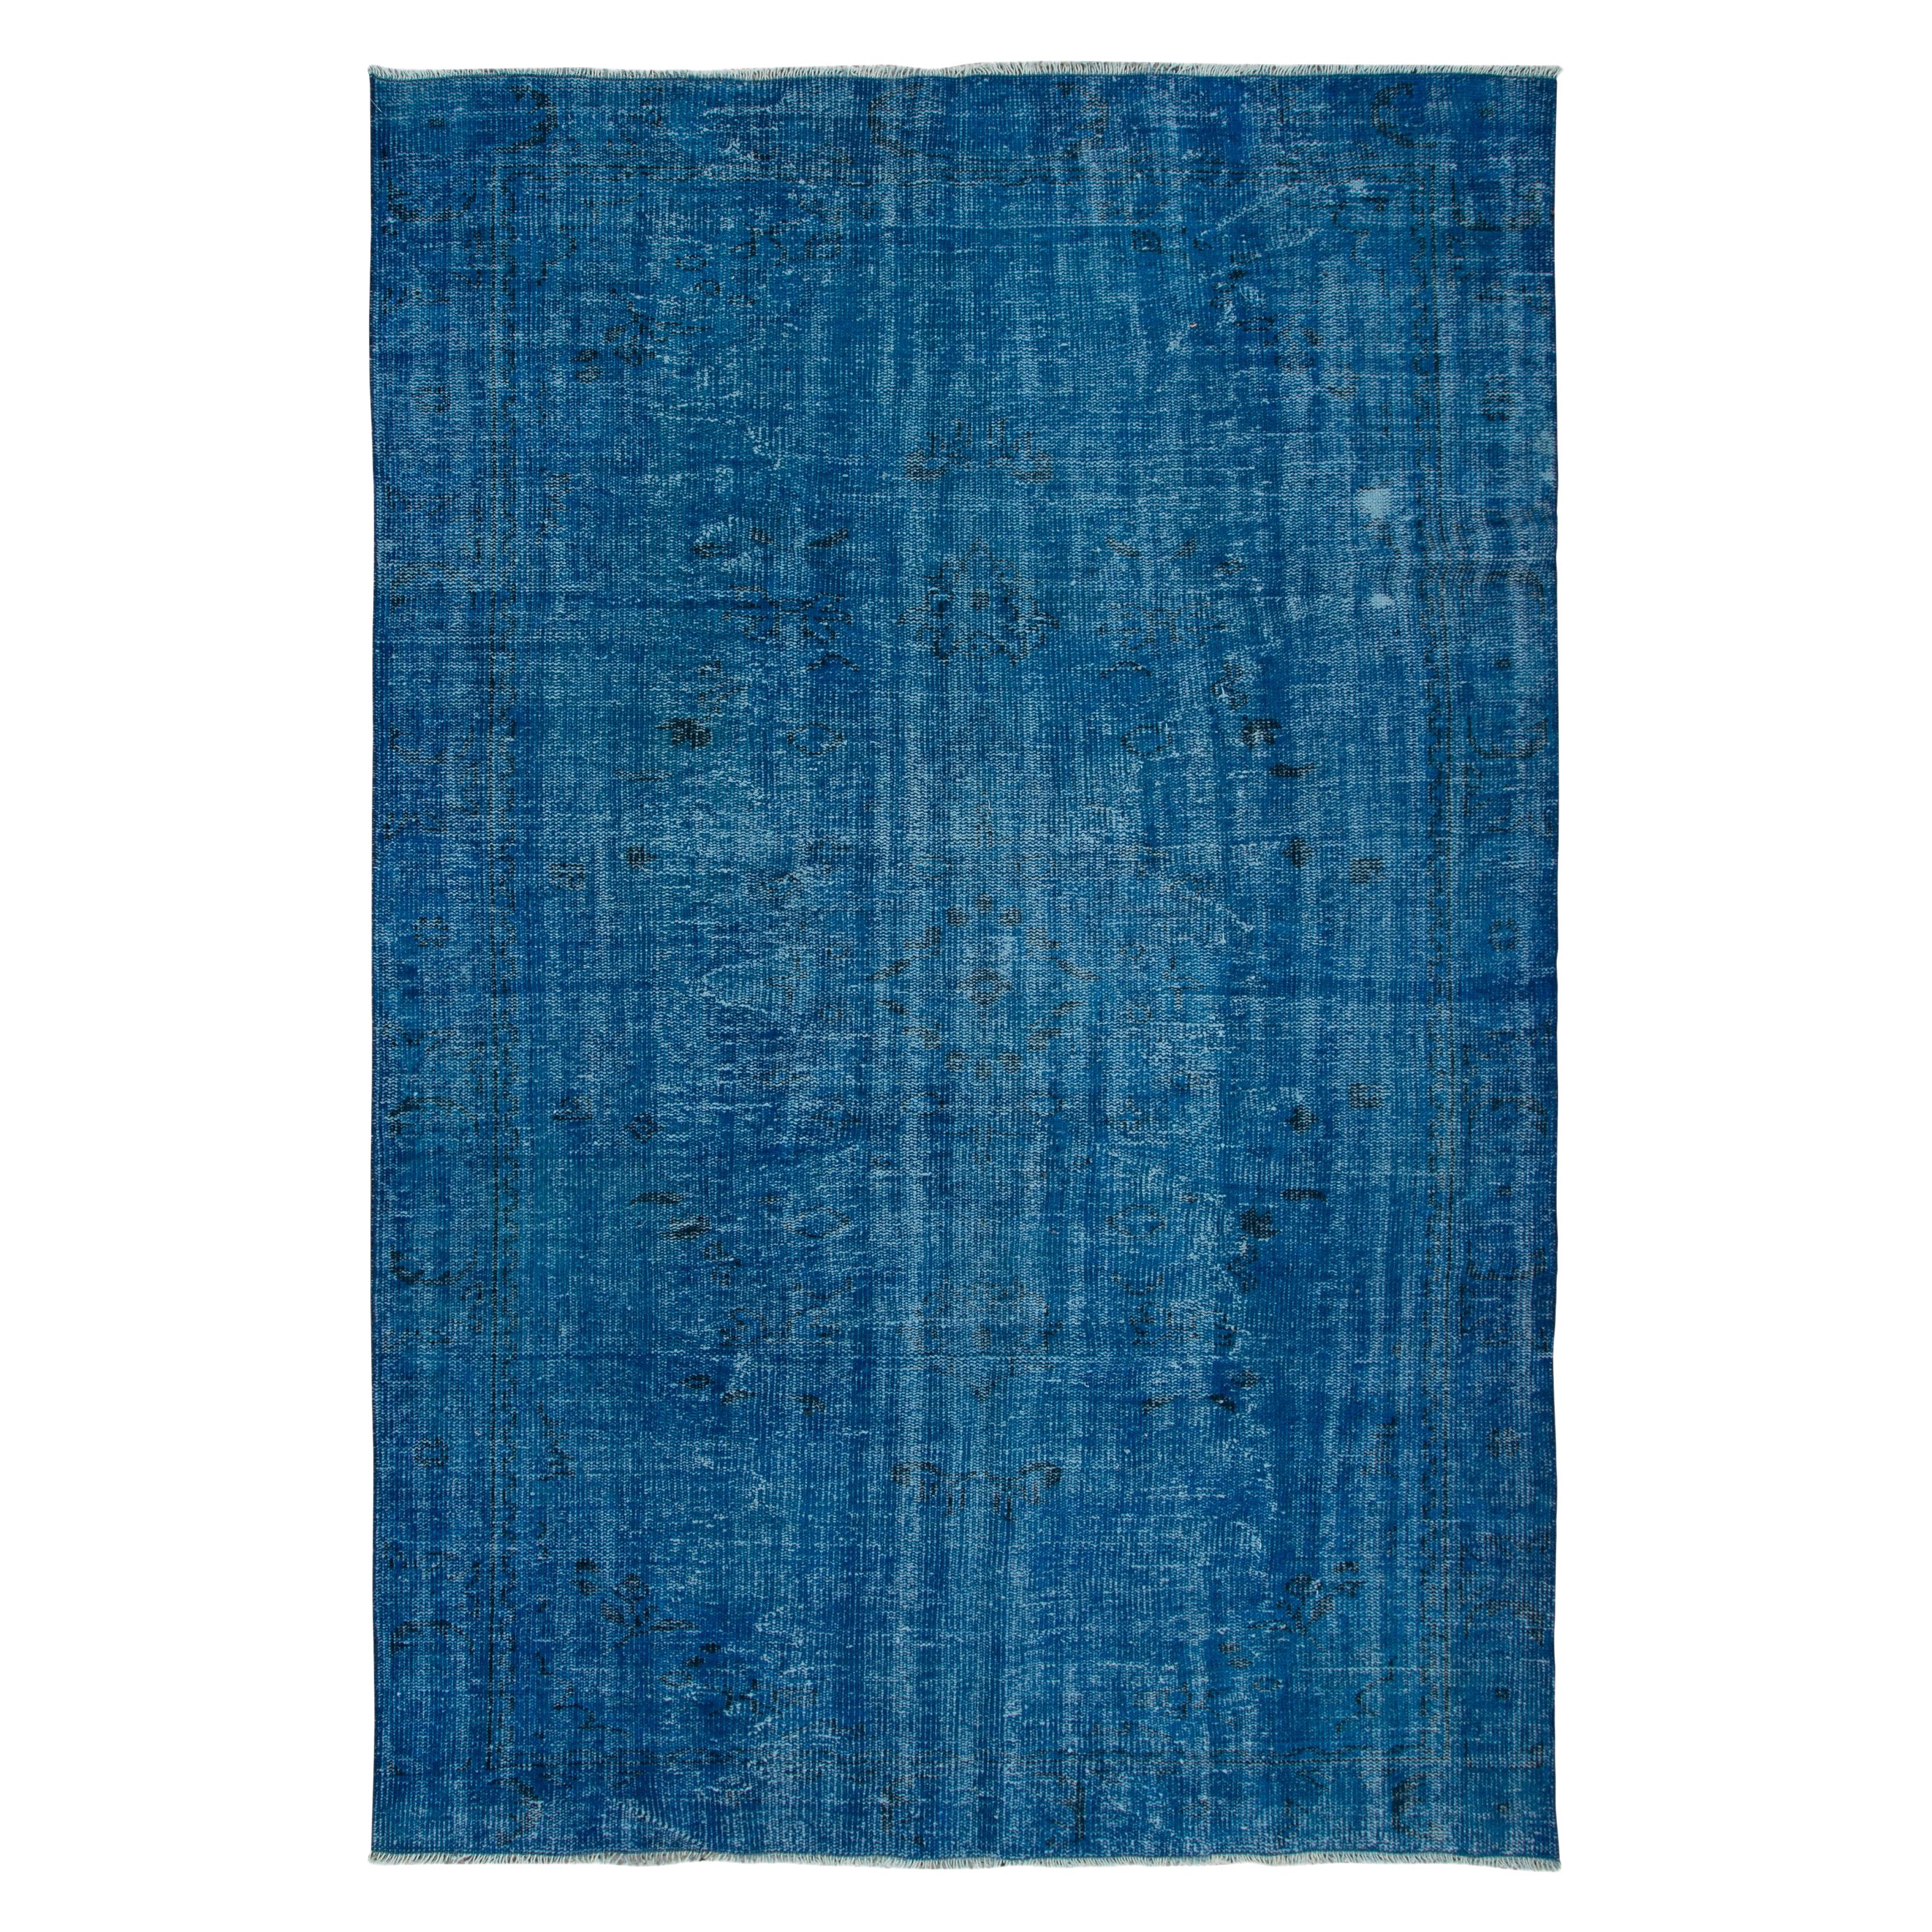 6x8.8 Ft Traditional Handmade Area Rug in Blue, Modern Turkish Redyed Carpet (tapis rouge turc moderne)